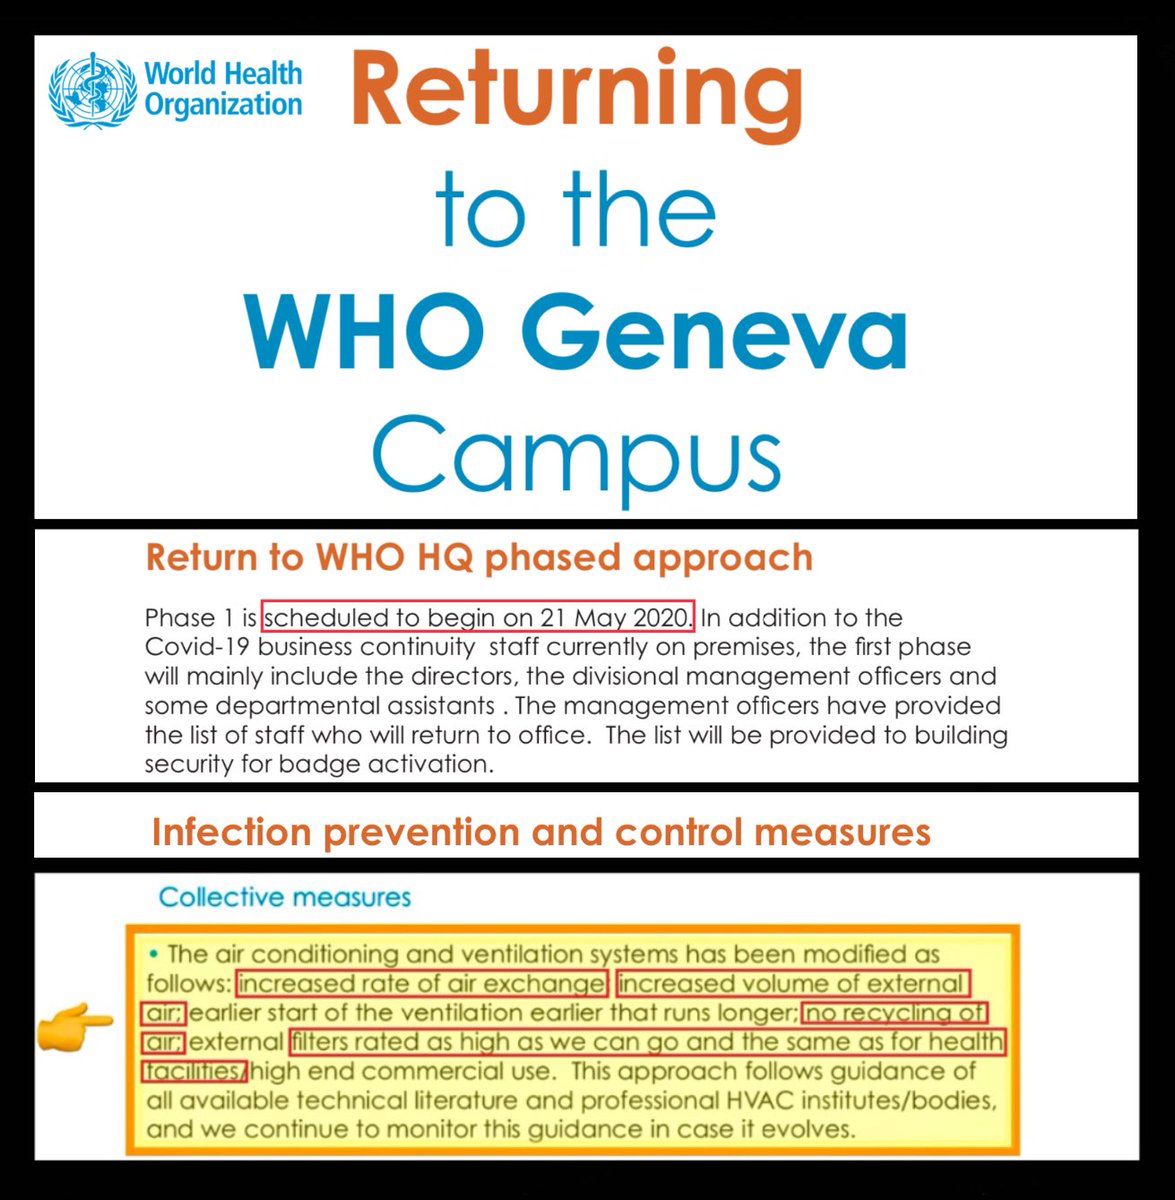 At the time when @WHO was assuring the world: “COVID-19 is NOT airborne”… …a ‘return to office’-document for WHO staff in Geneva stated: Ventilation system has been modified • increased volume of external air • no recycling of air • filters rated as high as we can go… 🤔